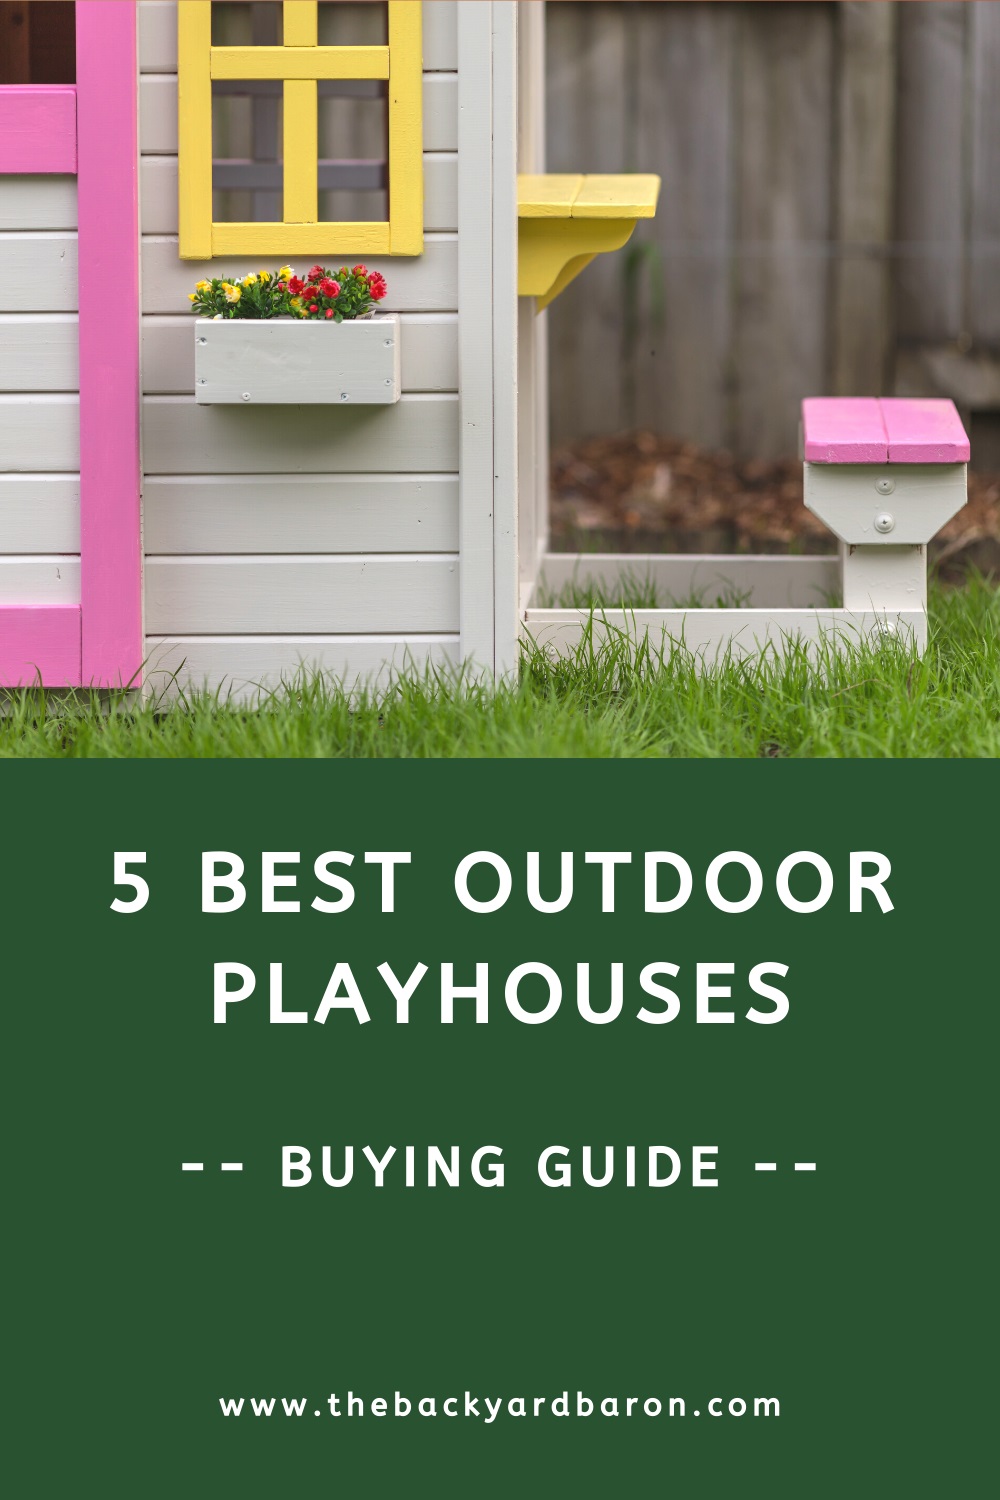 Outdoor playhouse buying guide